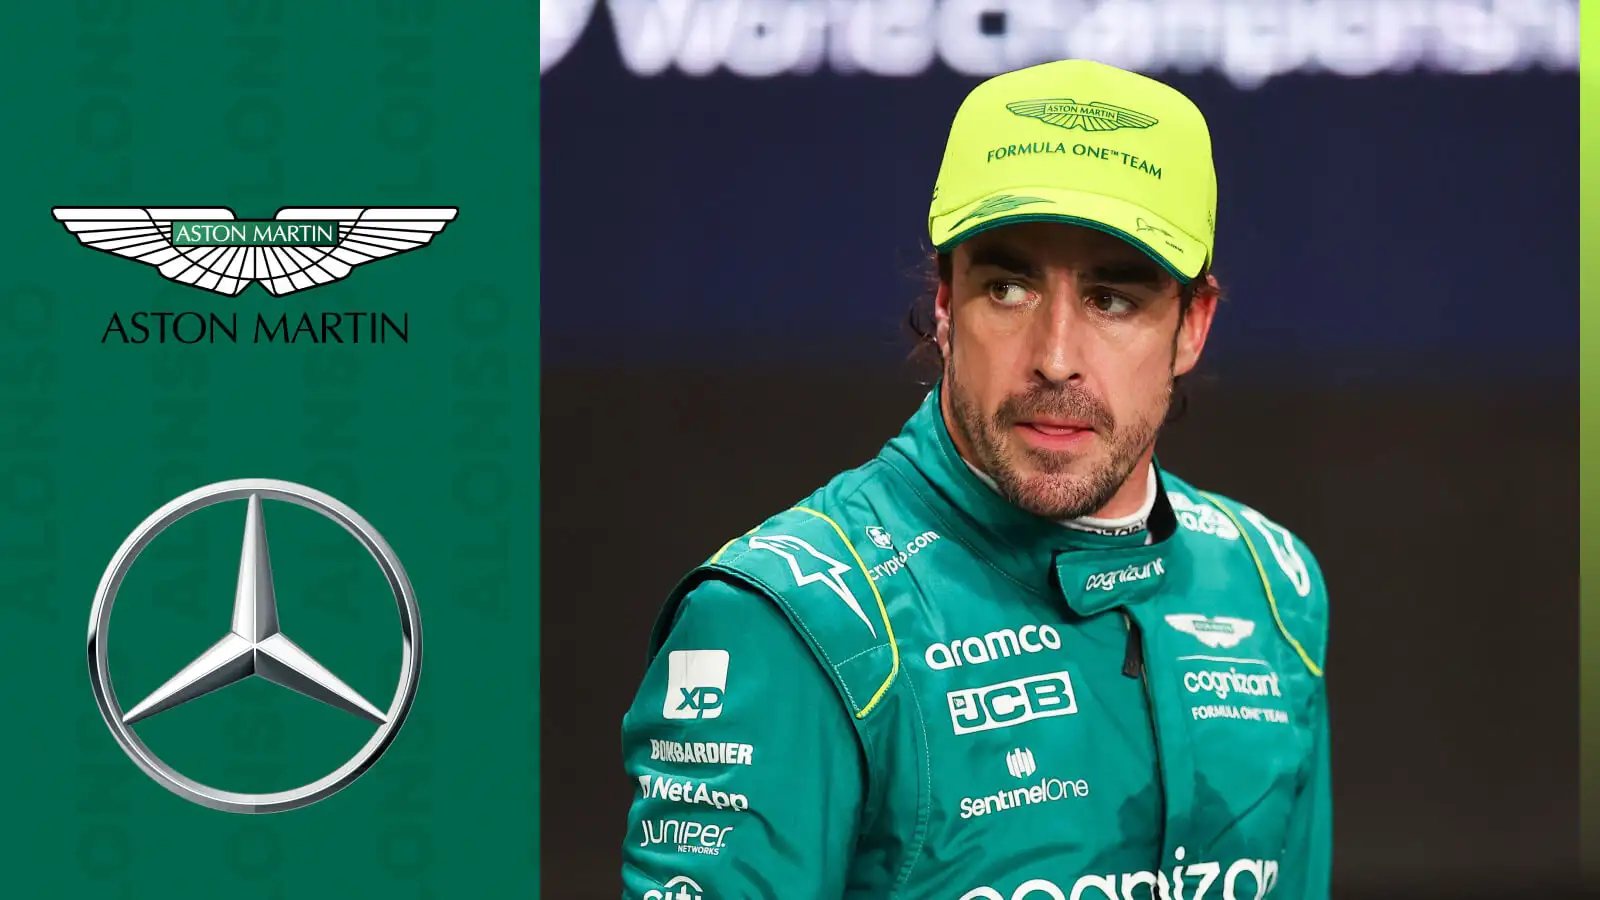 Fernando Alonso with prominent Aston Martin and Mercedes badges alongside him.